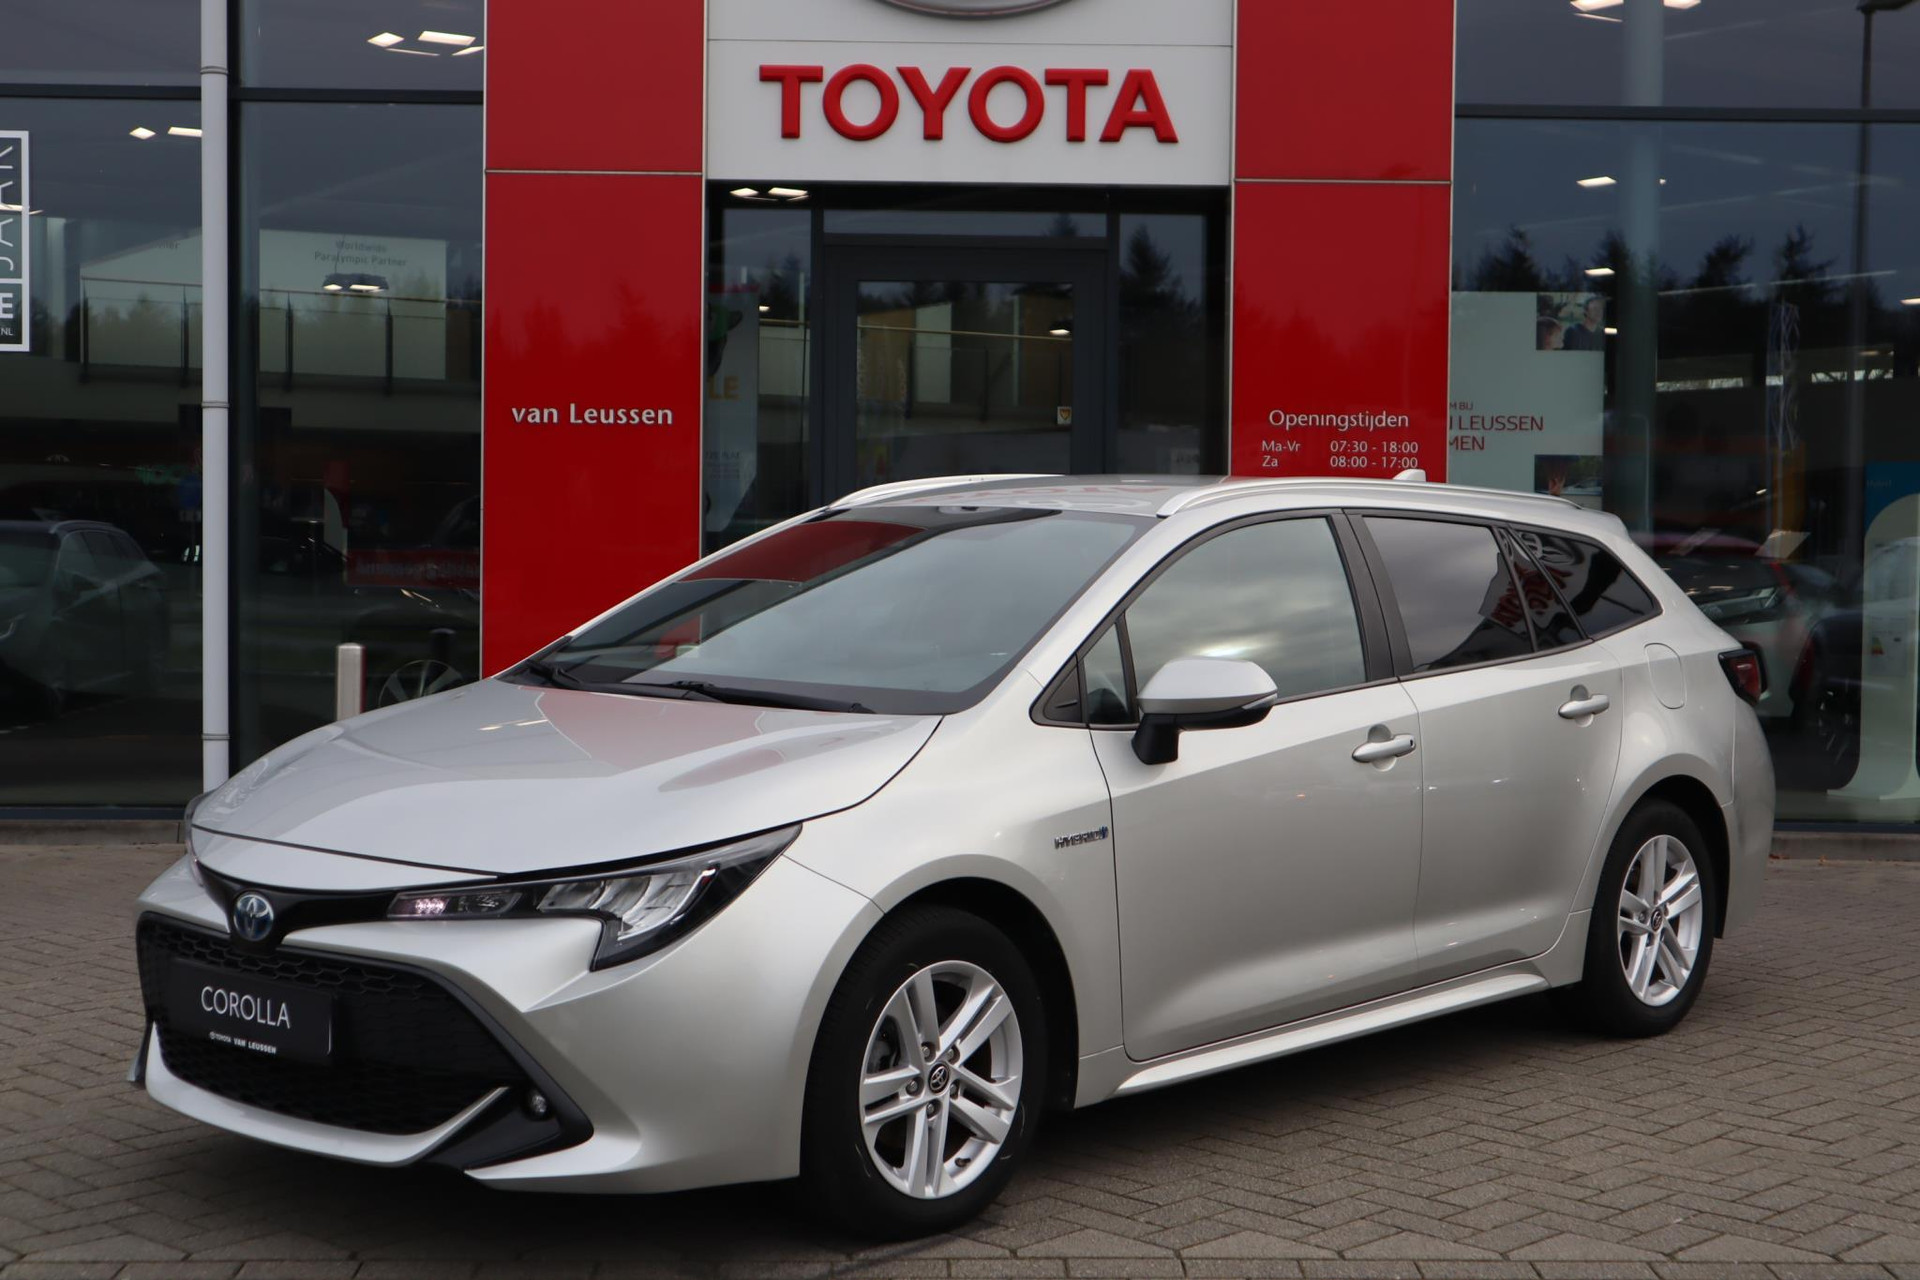 Toyota Corolla Touring Sports 1.8 Hybrid Dynamic APPLE/ANDROID STOEL/STUURVERW. CAMERA AD-CRUISE PRIVACY-GLASS LM-VELGEN bij viaBOVAG.nl